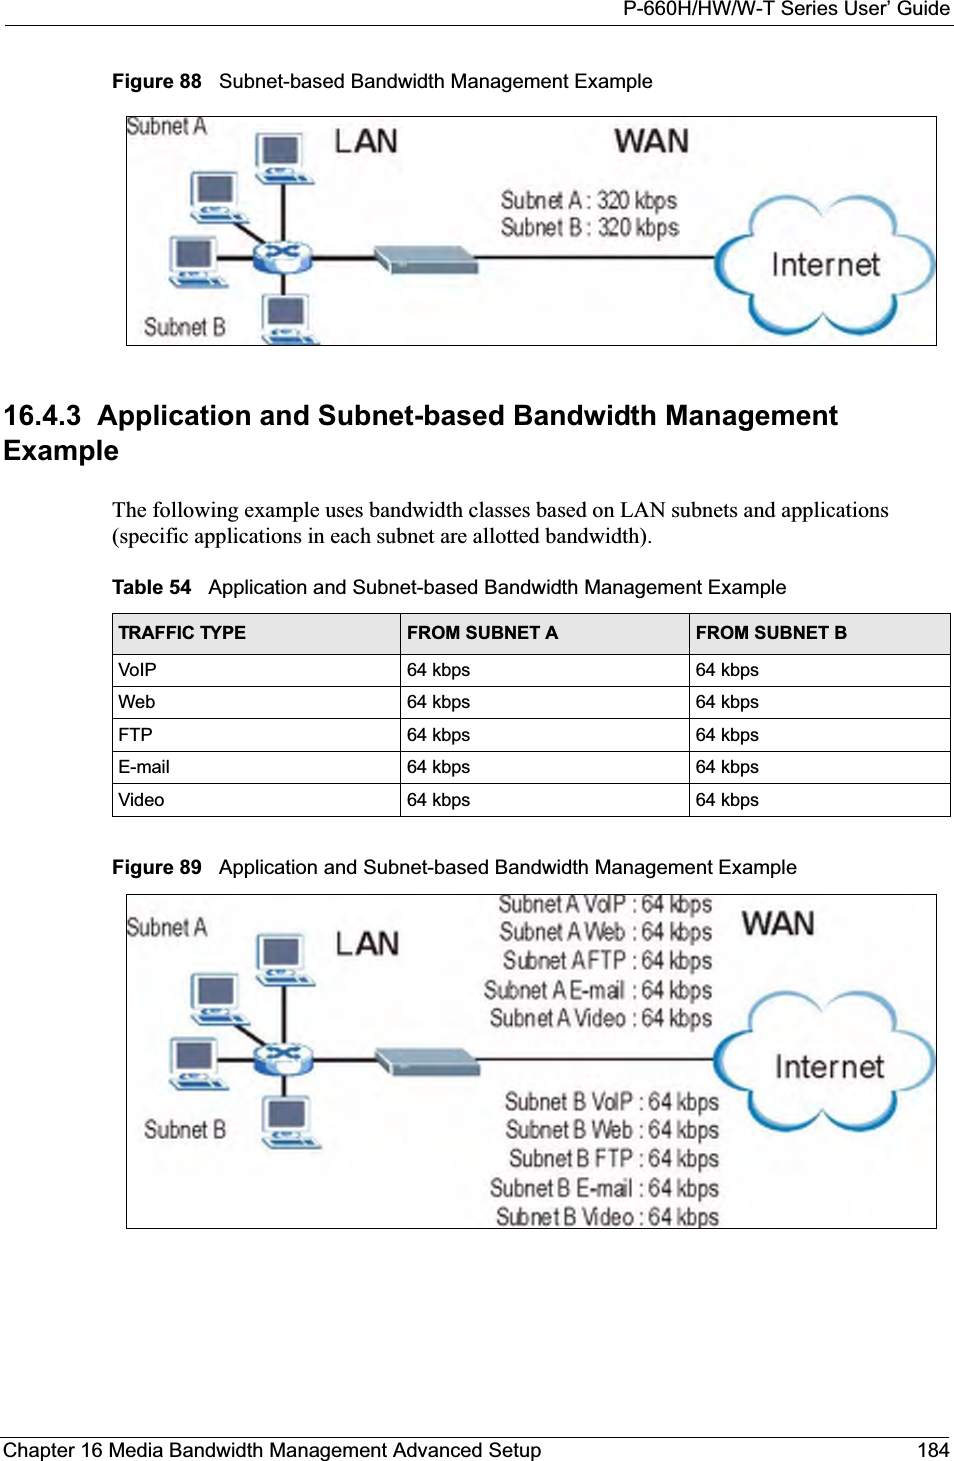 P-660H/HW/W-T Series User’ GuideChapter 16 Media Bandwidth Management Advanced Setup 184Figure 88   Subnet-based Bandwidth Management Example16.4.3  Application and Subnet-based Bandwidth Management ExampleThe following example uses bandwidth classes based on LAN subnets and applications (specific applications in each subnet are allotted bandwidth).Figure 89   Application and Subnet-based Bandwidth Management ExampleTable 54   Application and Subnet-based Bandwidth Management ExampleTRAFFIC TYPE FROM SUBNET A FROM SUBNET BVoIP 64 kbps 64 kbpsWeb 64 kbps 64 kbpsFTP 64 kbps 64 kbpsE-mail 64 kbps 64 kbpsVideo 64 kbps 64 kbps